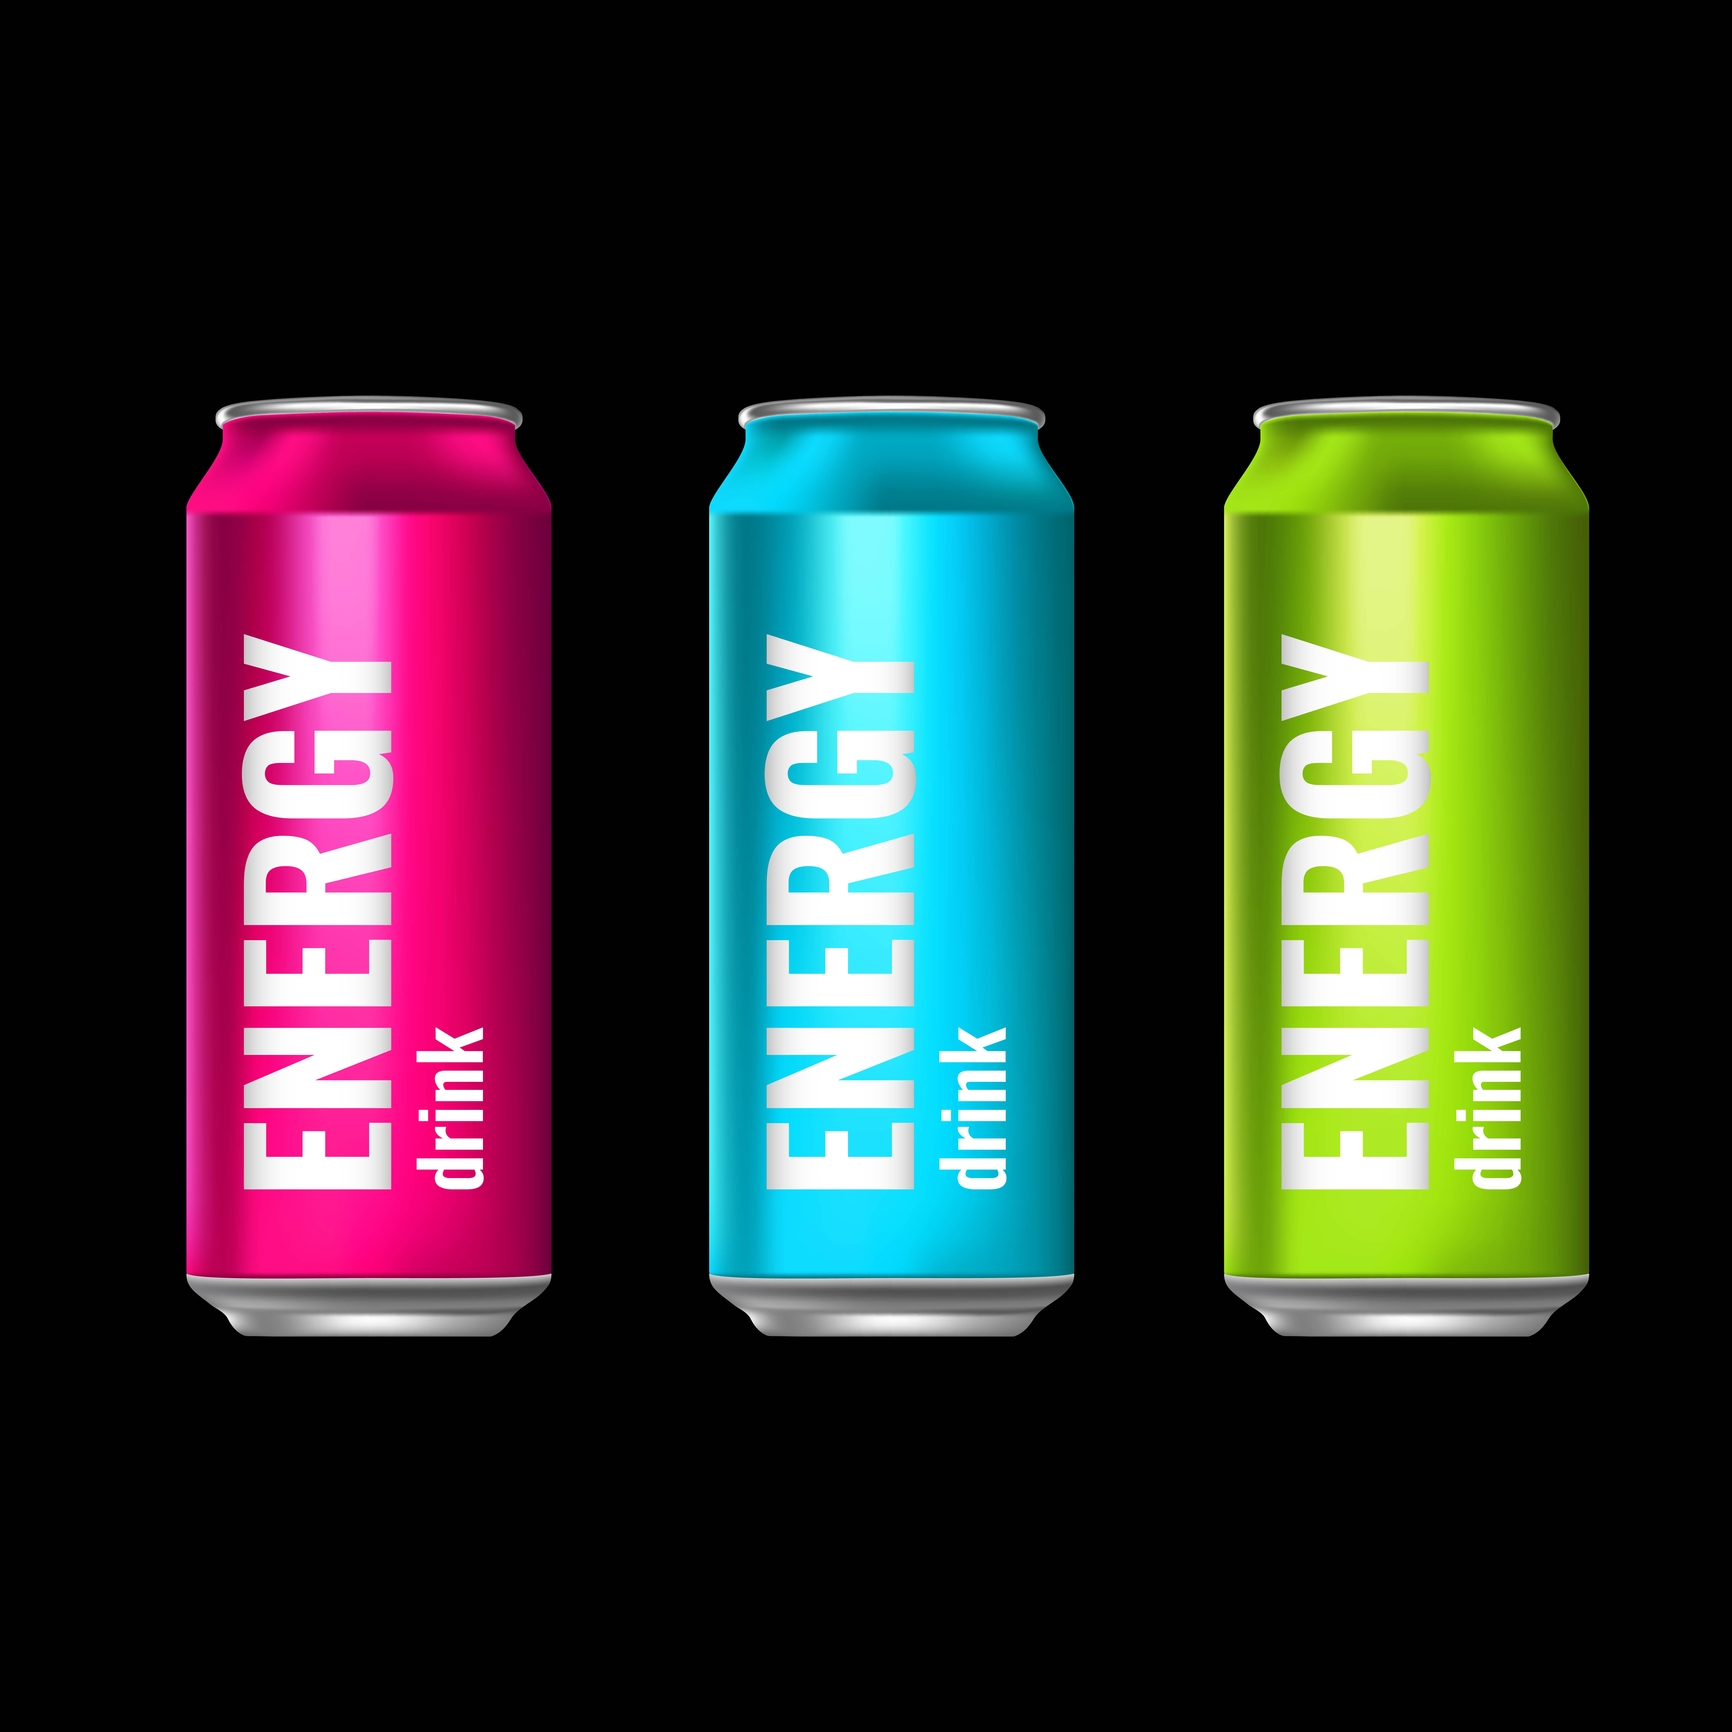 11 Healthy Energy Drink Ingredients To Watch